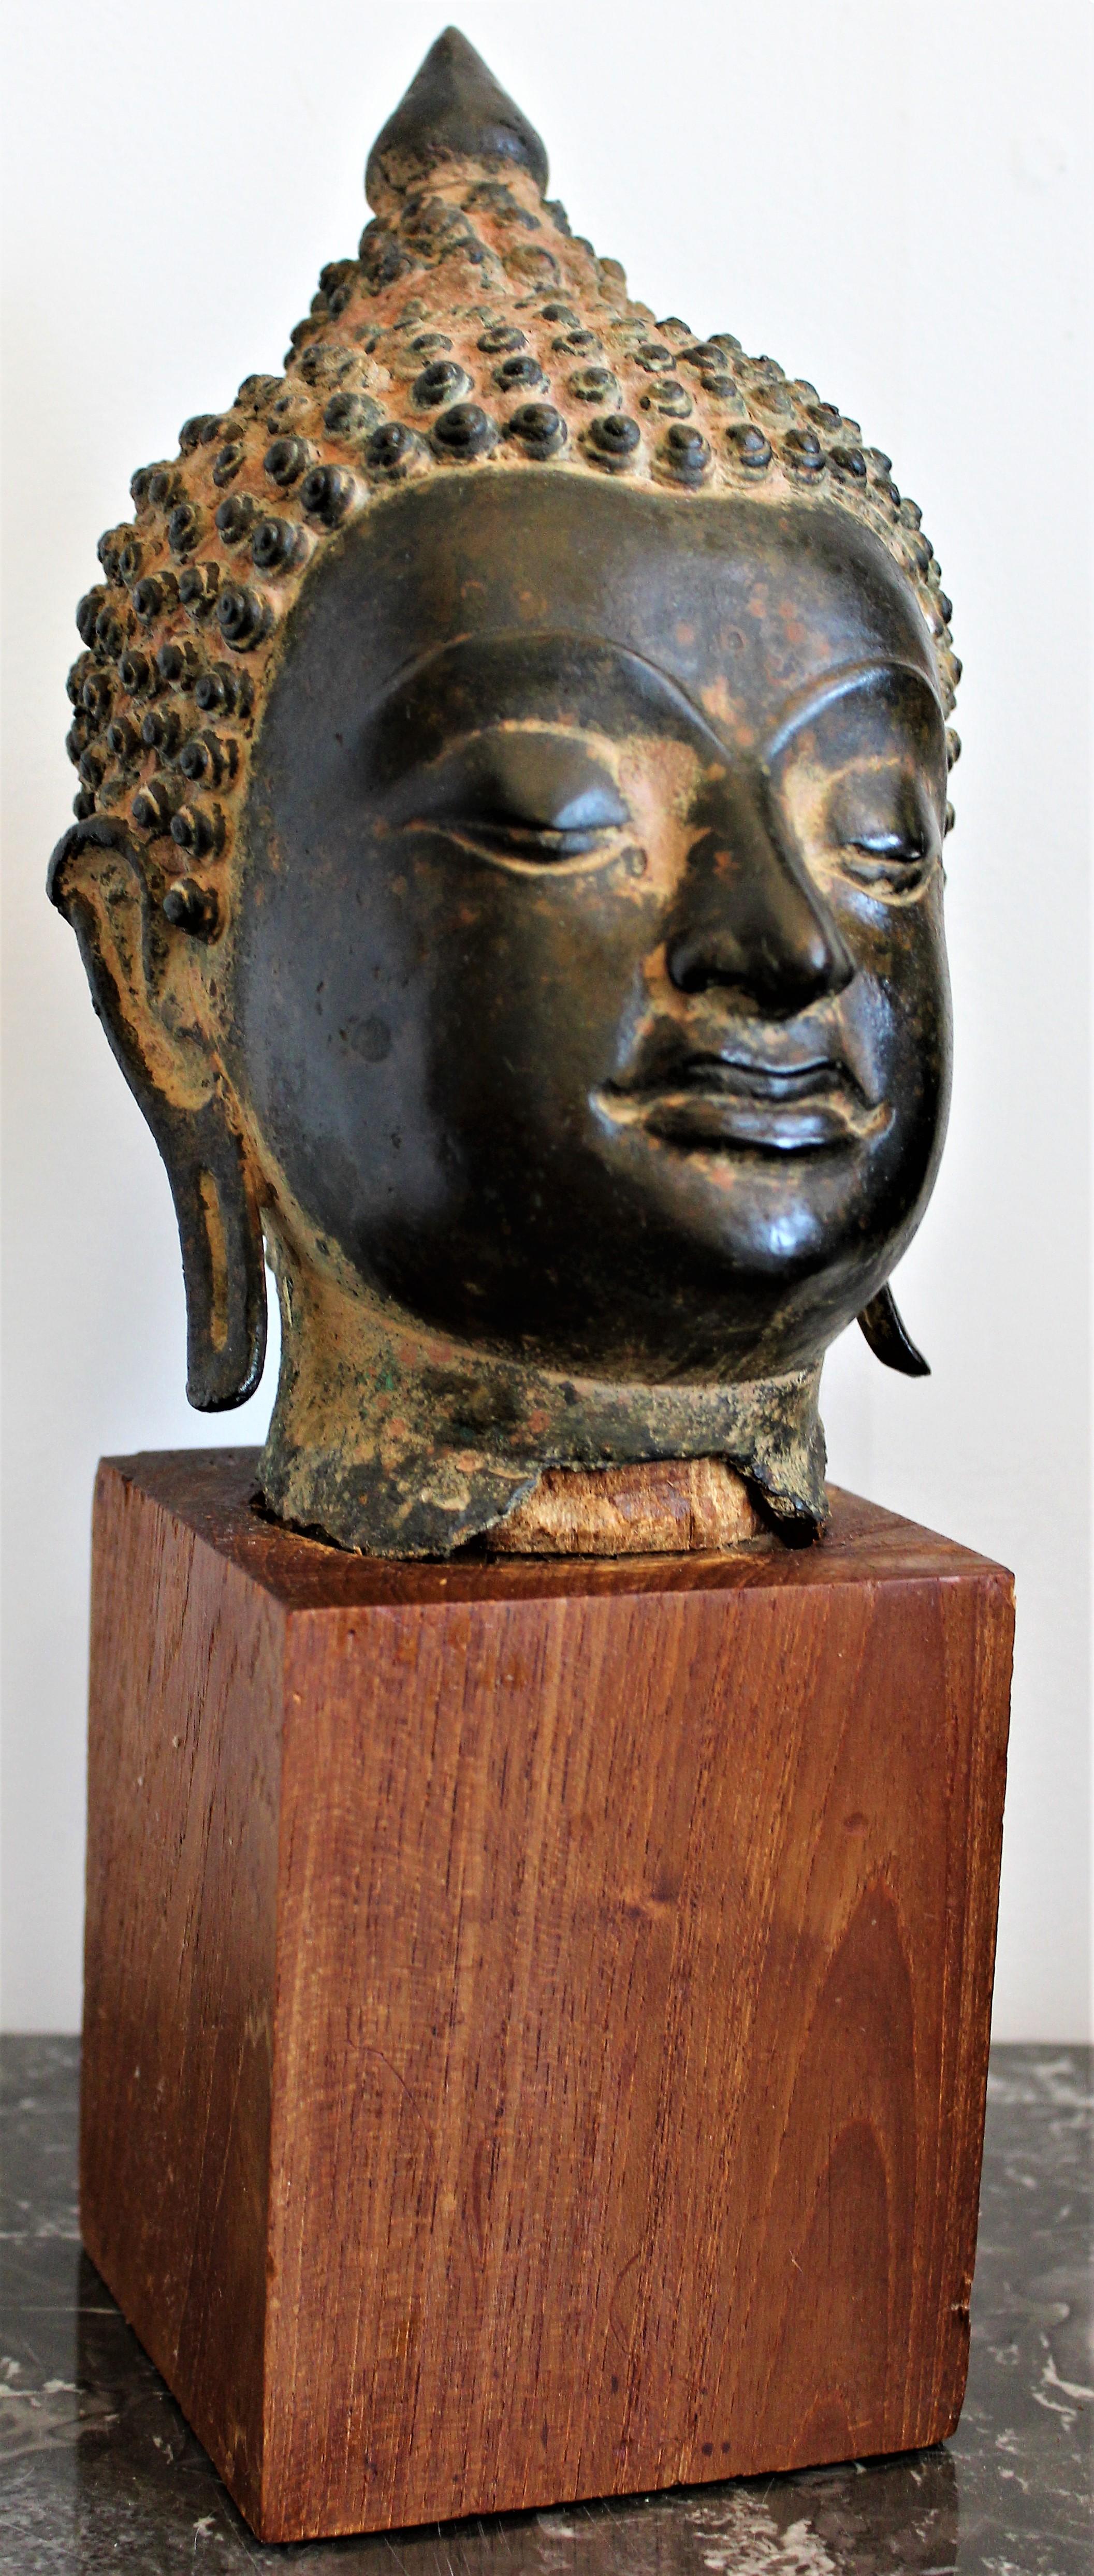 Antique Asian and extremely detailed cast bronze fragment of the head of Buddha, dating from the 18 century and presumably having Thai or Tibetan origins. The sculpture fragment is securely presented on a simple teak block.

The bronze head on its